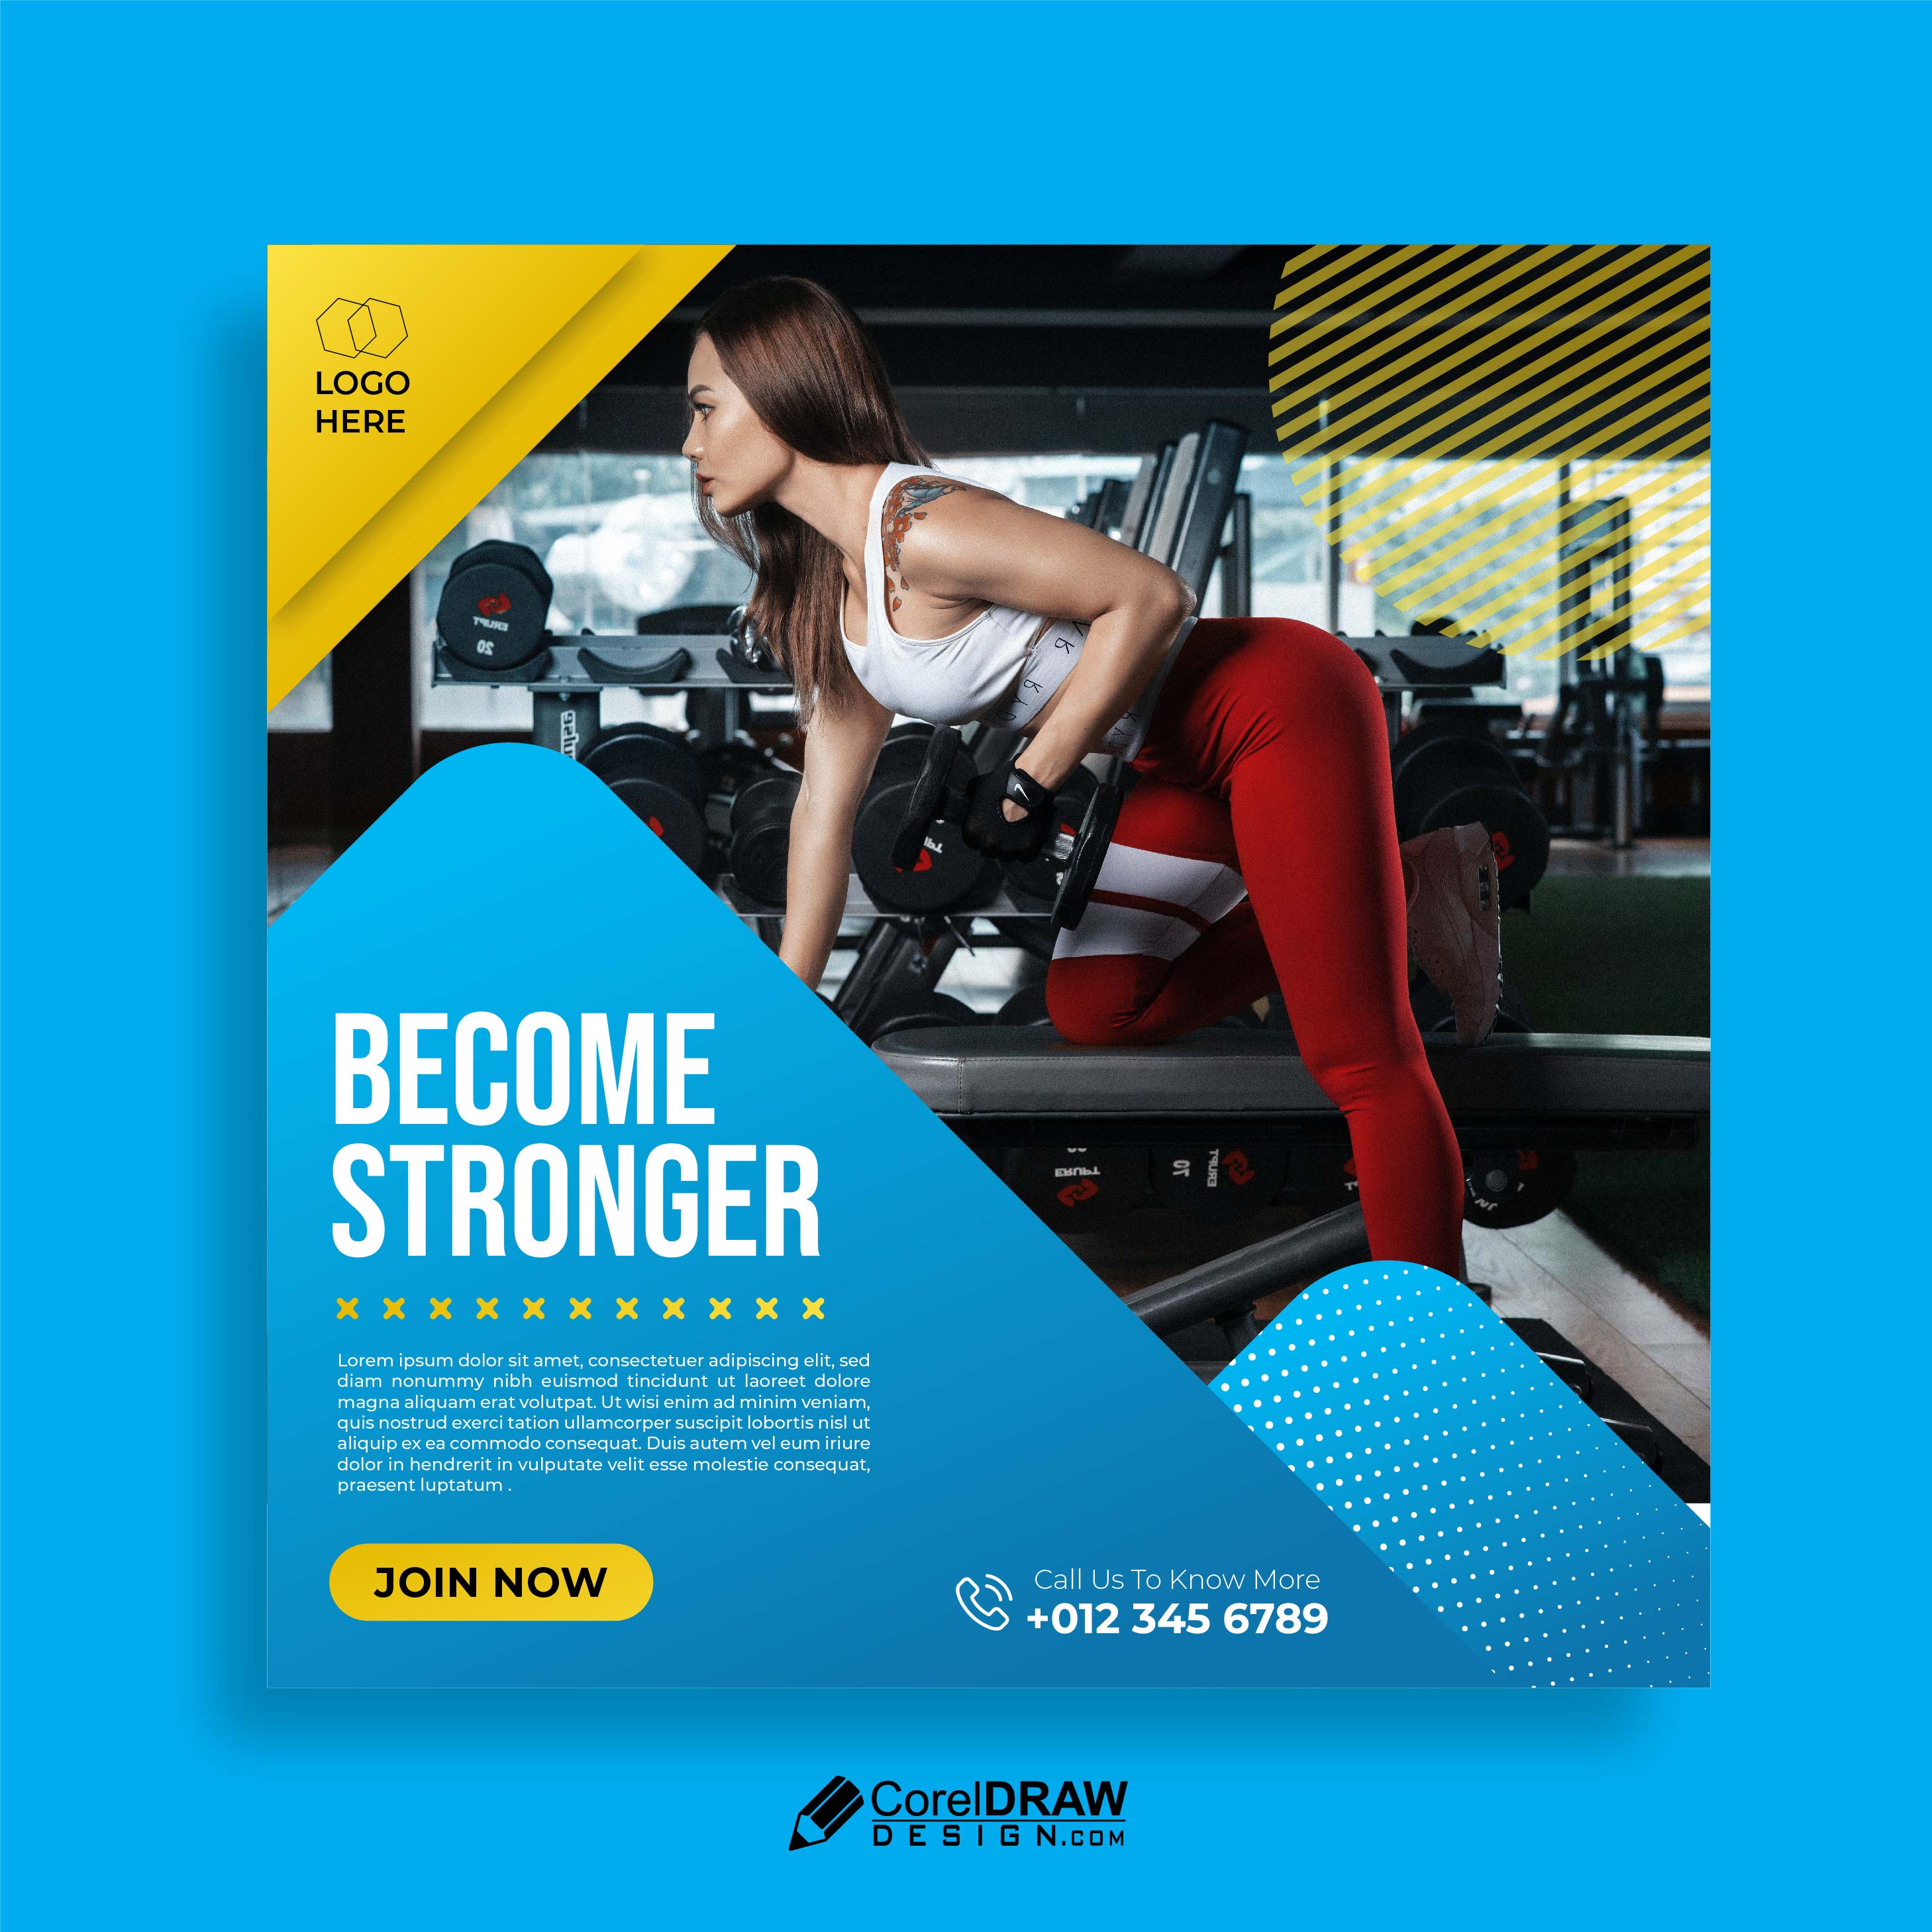 Abstract fitness gym Social Media Vector Template